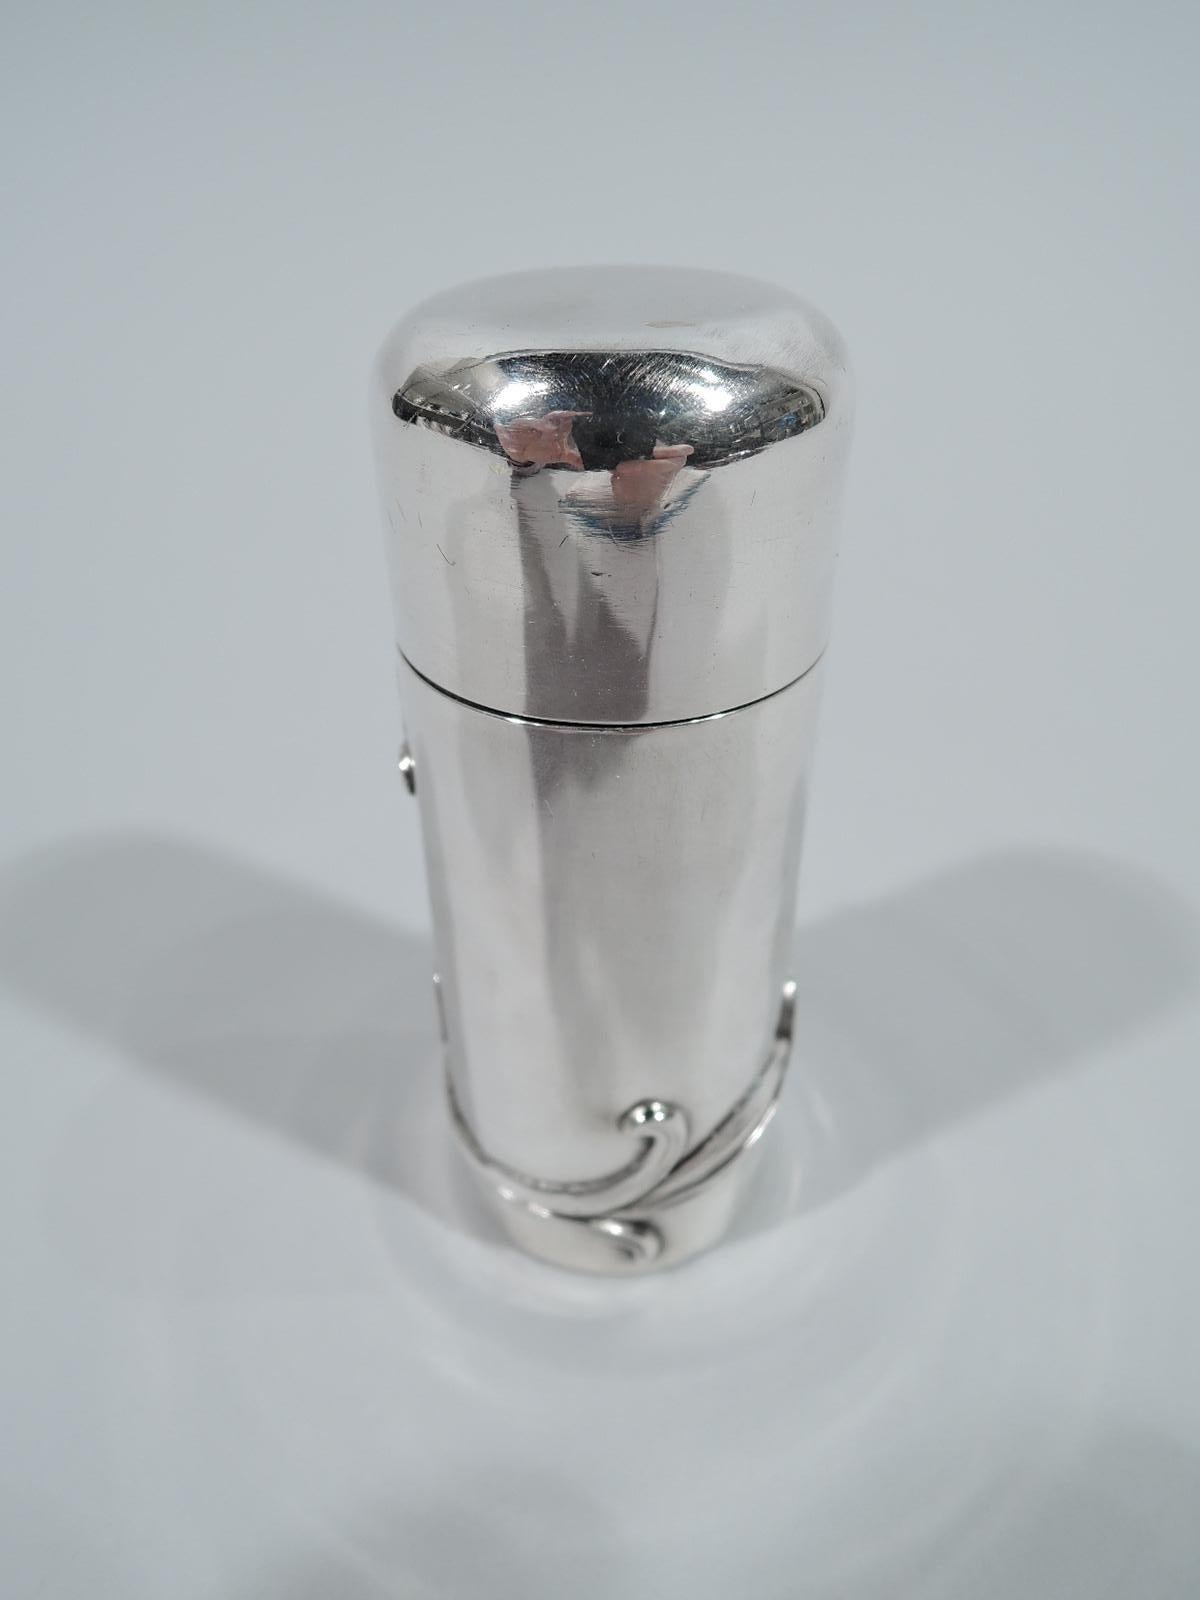 Turn-of-the-century Art Nouveau sterling silver vanity box. Made by William B. Kerr in Newark. Cylindrical with snug-fitting cover. Flower with fluid and whiplash wraparound stem applied to body. Fully marked and numbered 1379. Weight: 2 troy ounces.